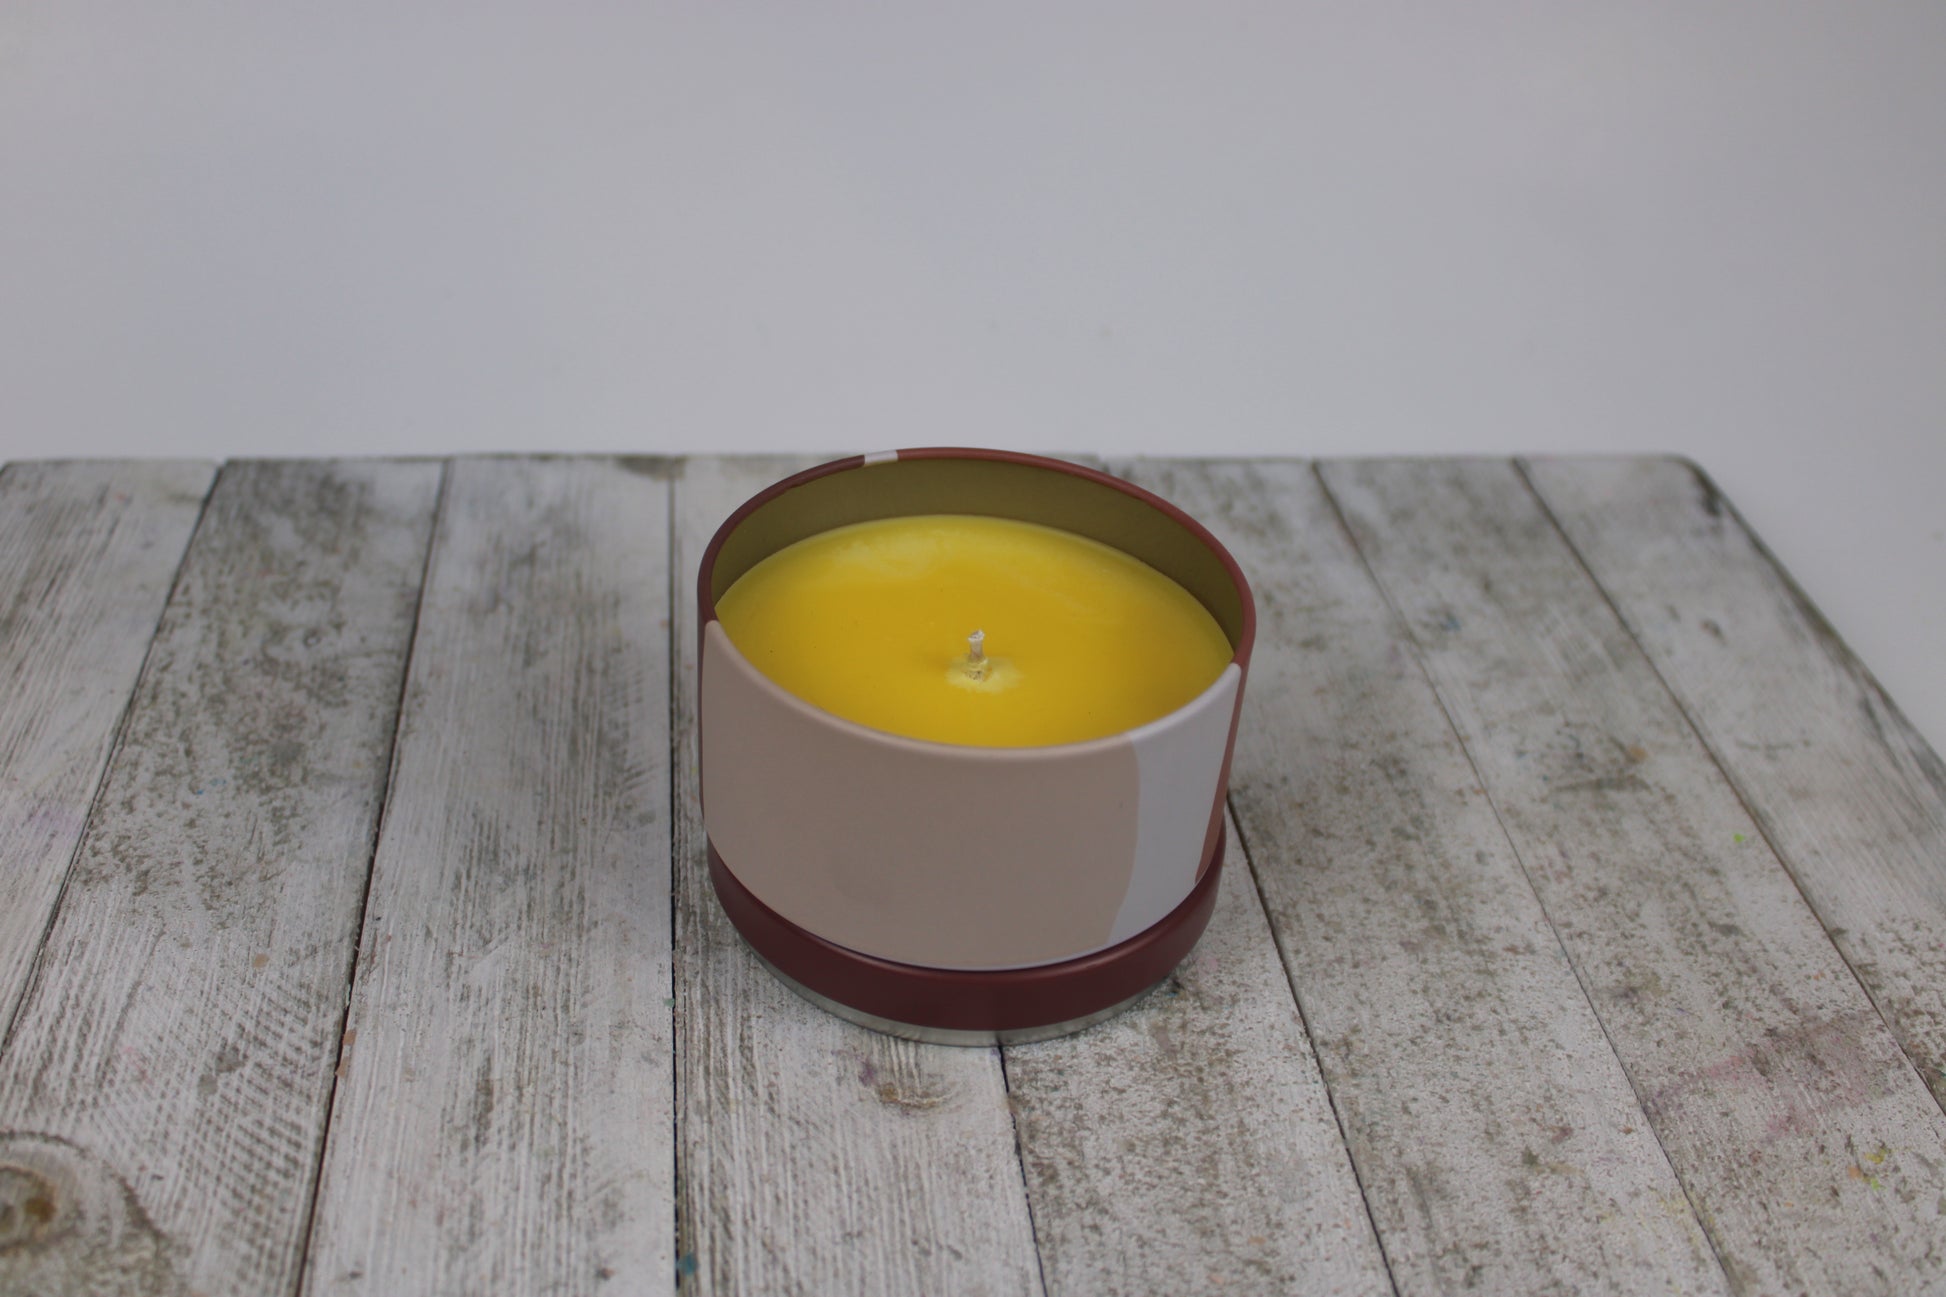 Chestnut and Brown Sugar Candle